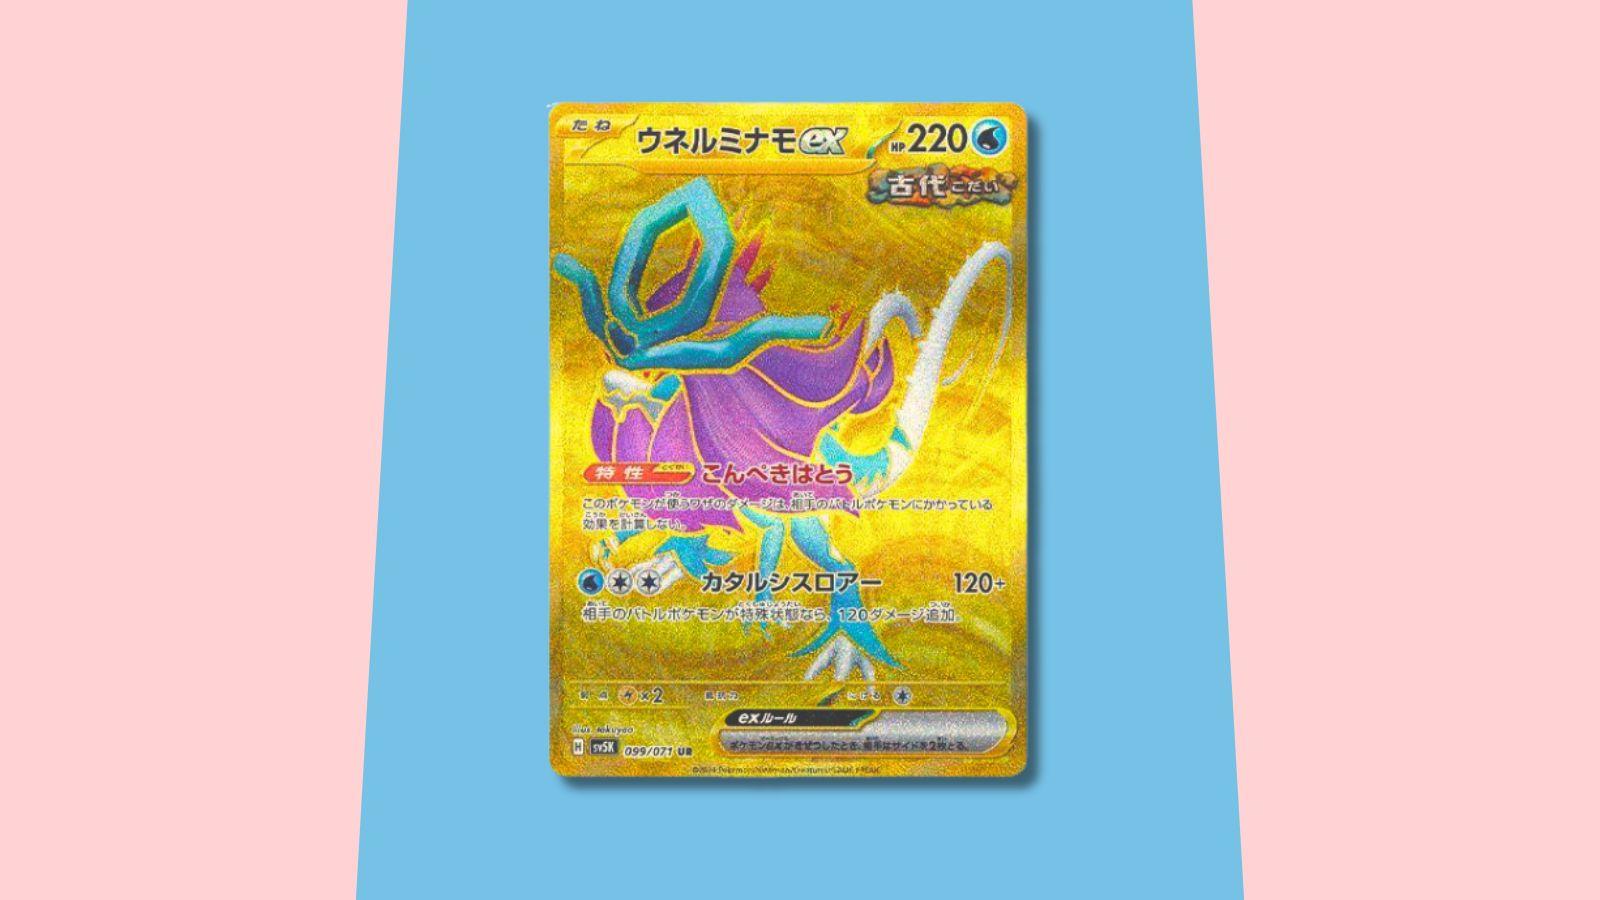 Hyper Rare Walking Wake Pokemon card with abstract pink and blue background.